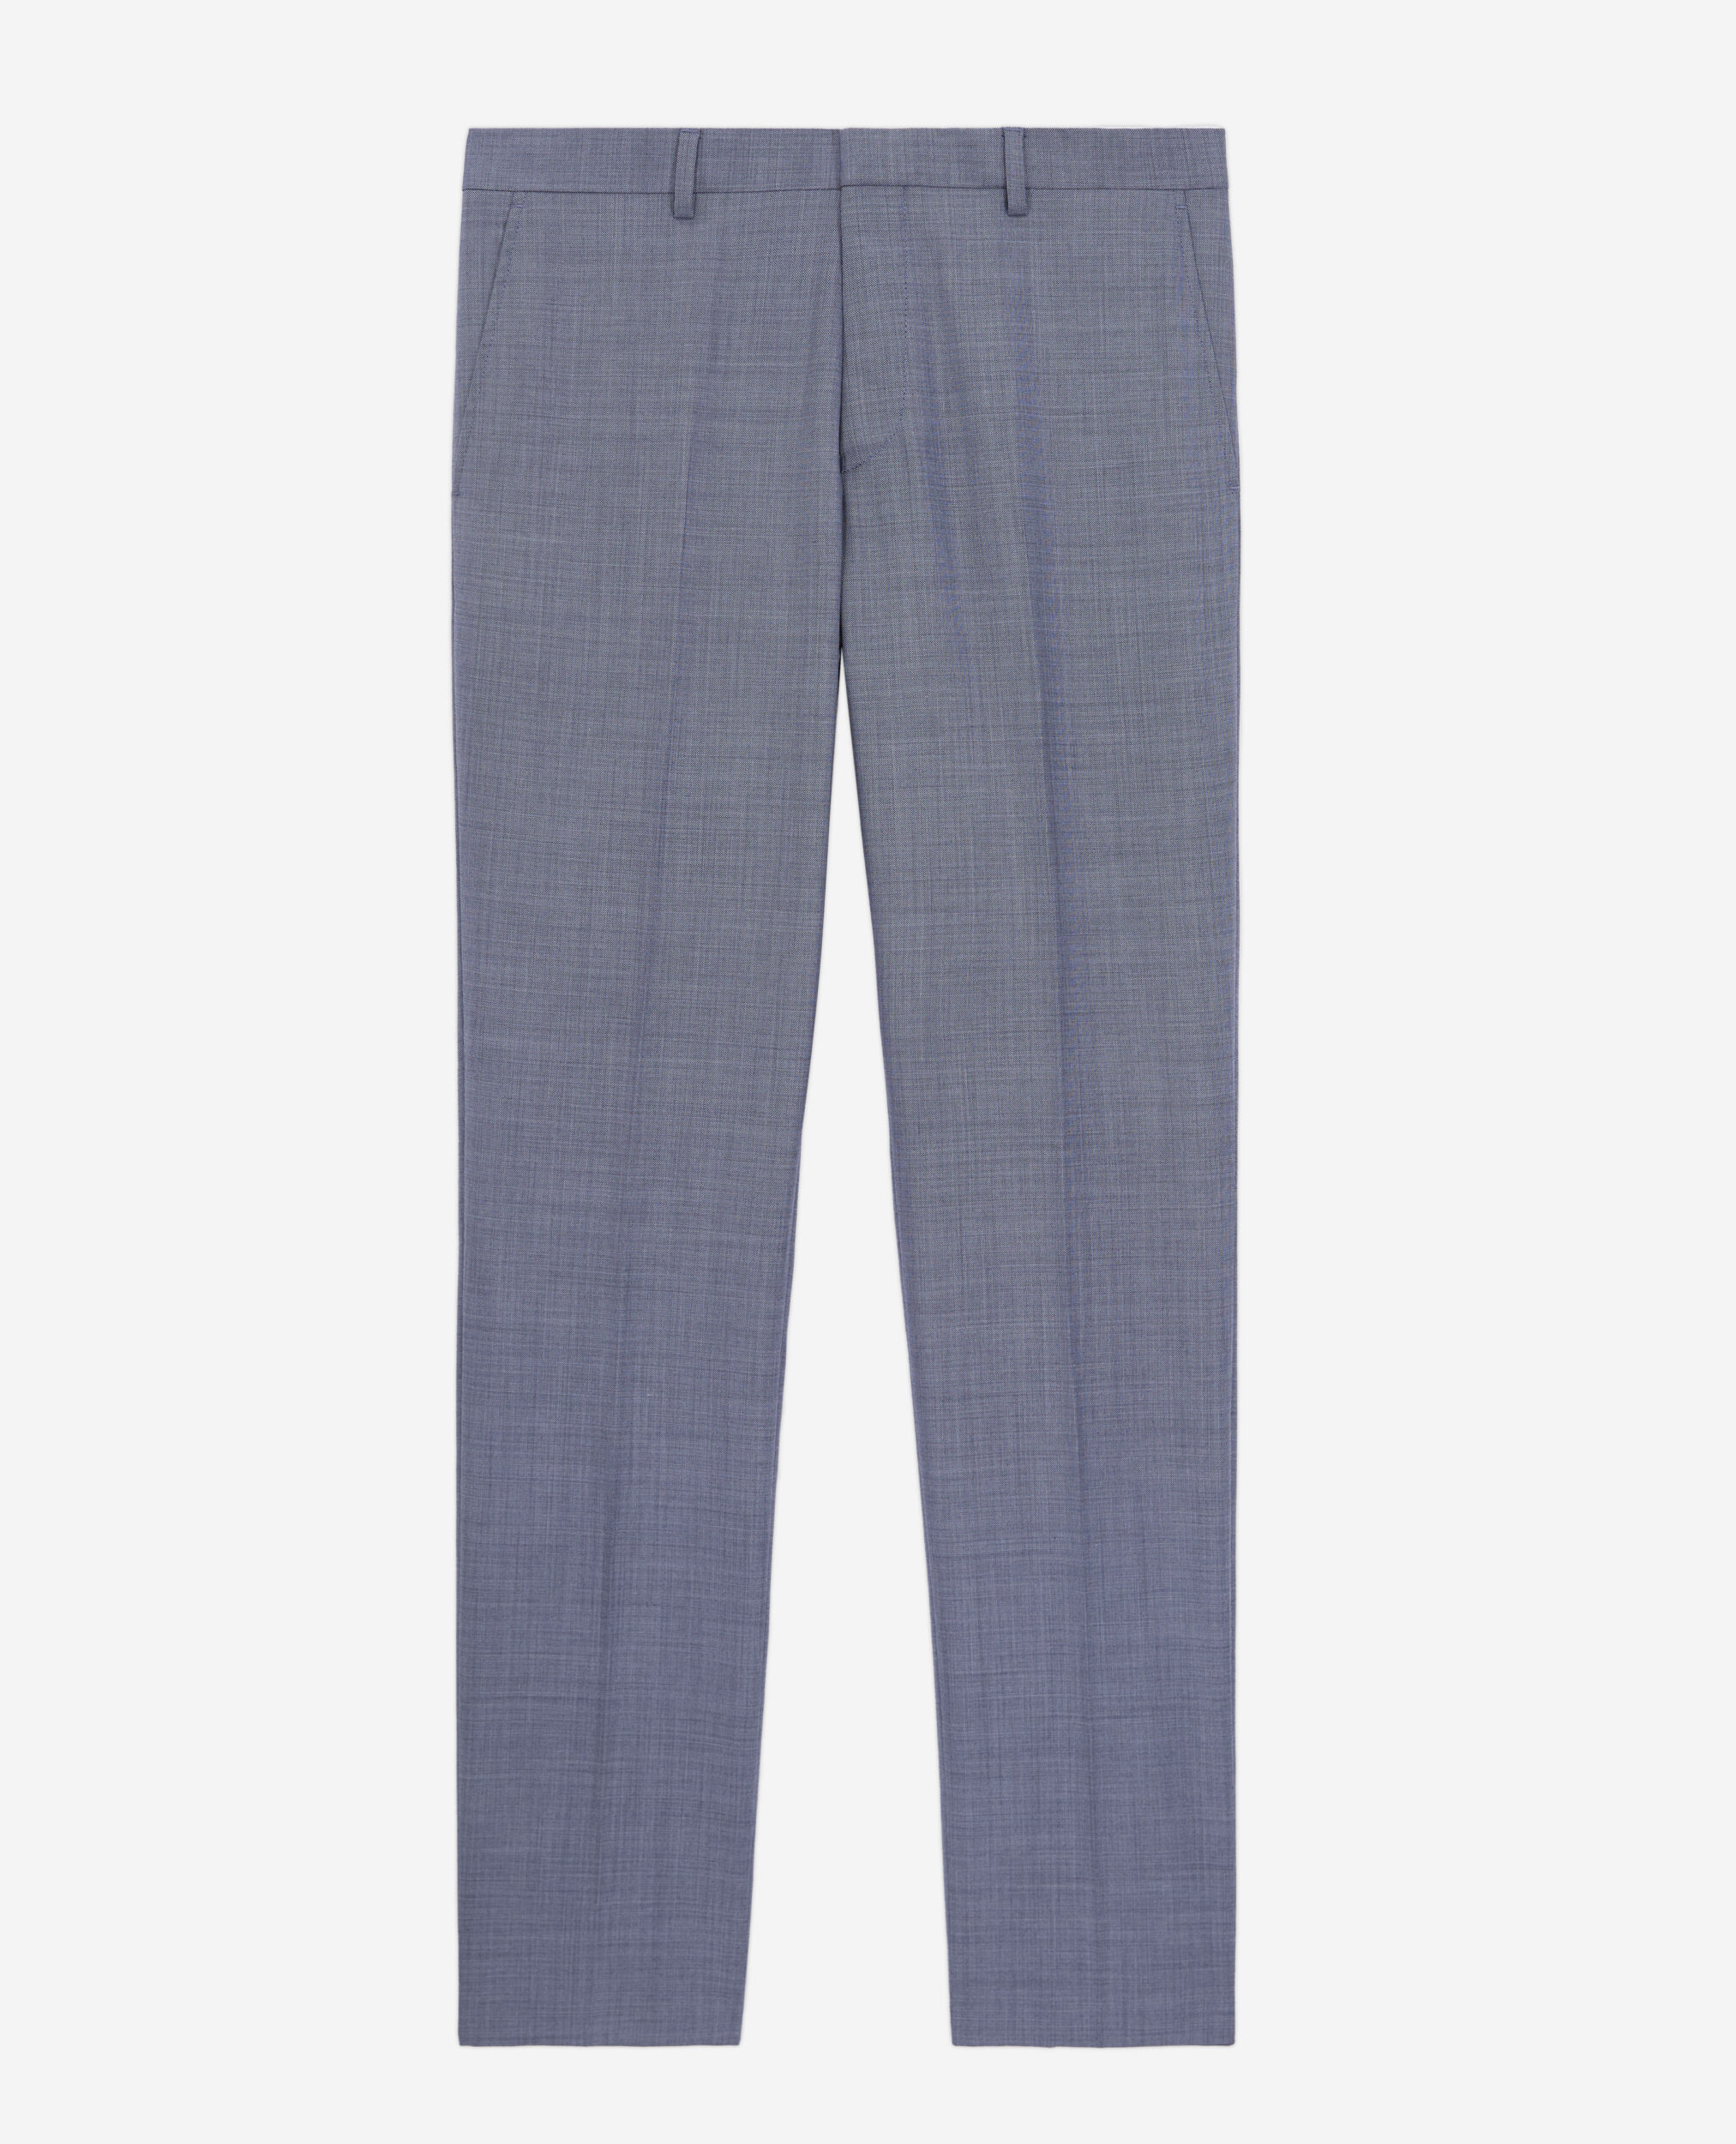 Blue and grey checkered wool suit trousers, LIGHT BLUE, hi-res image number null